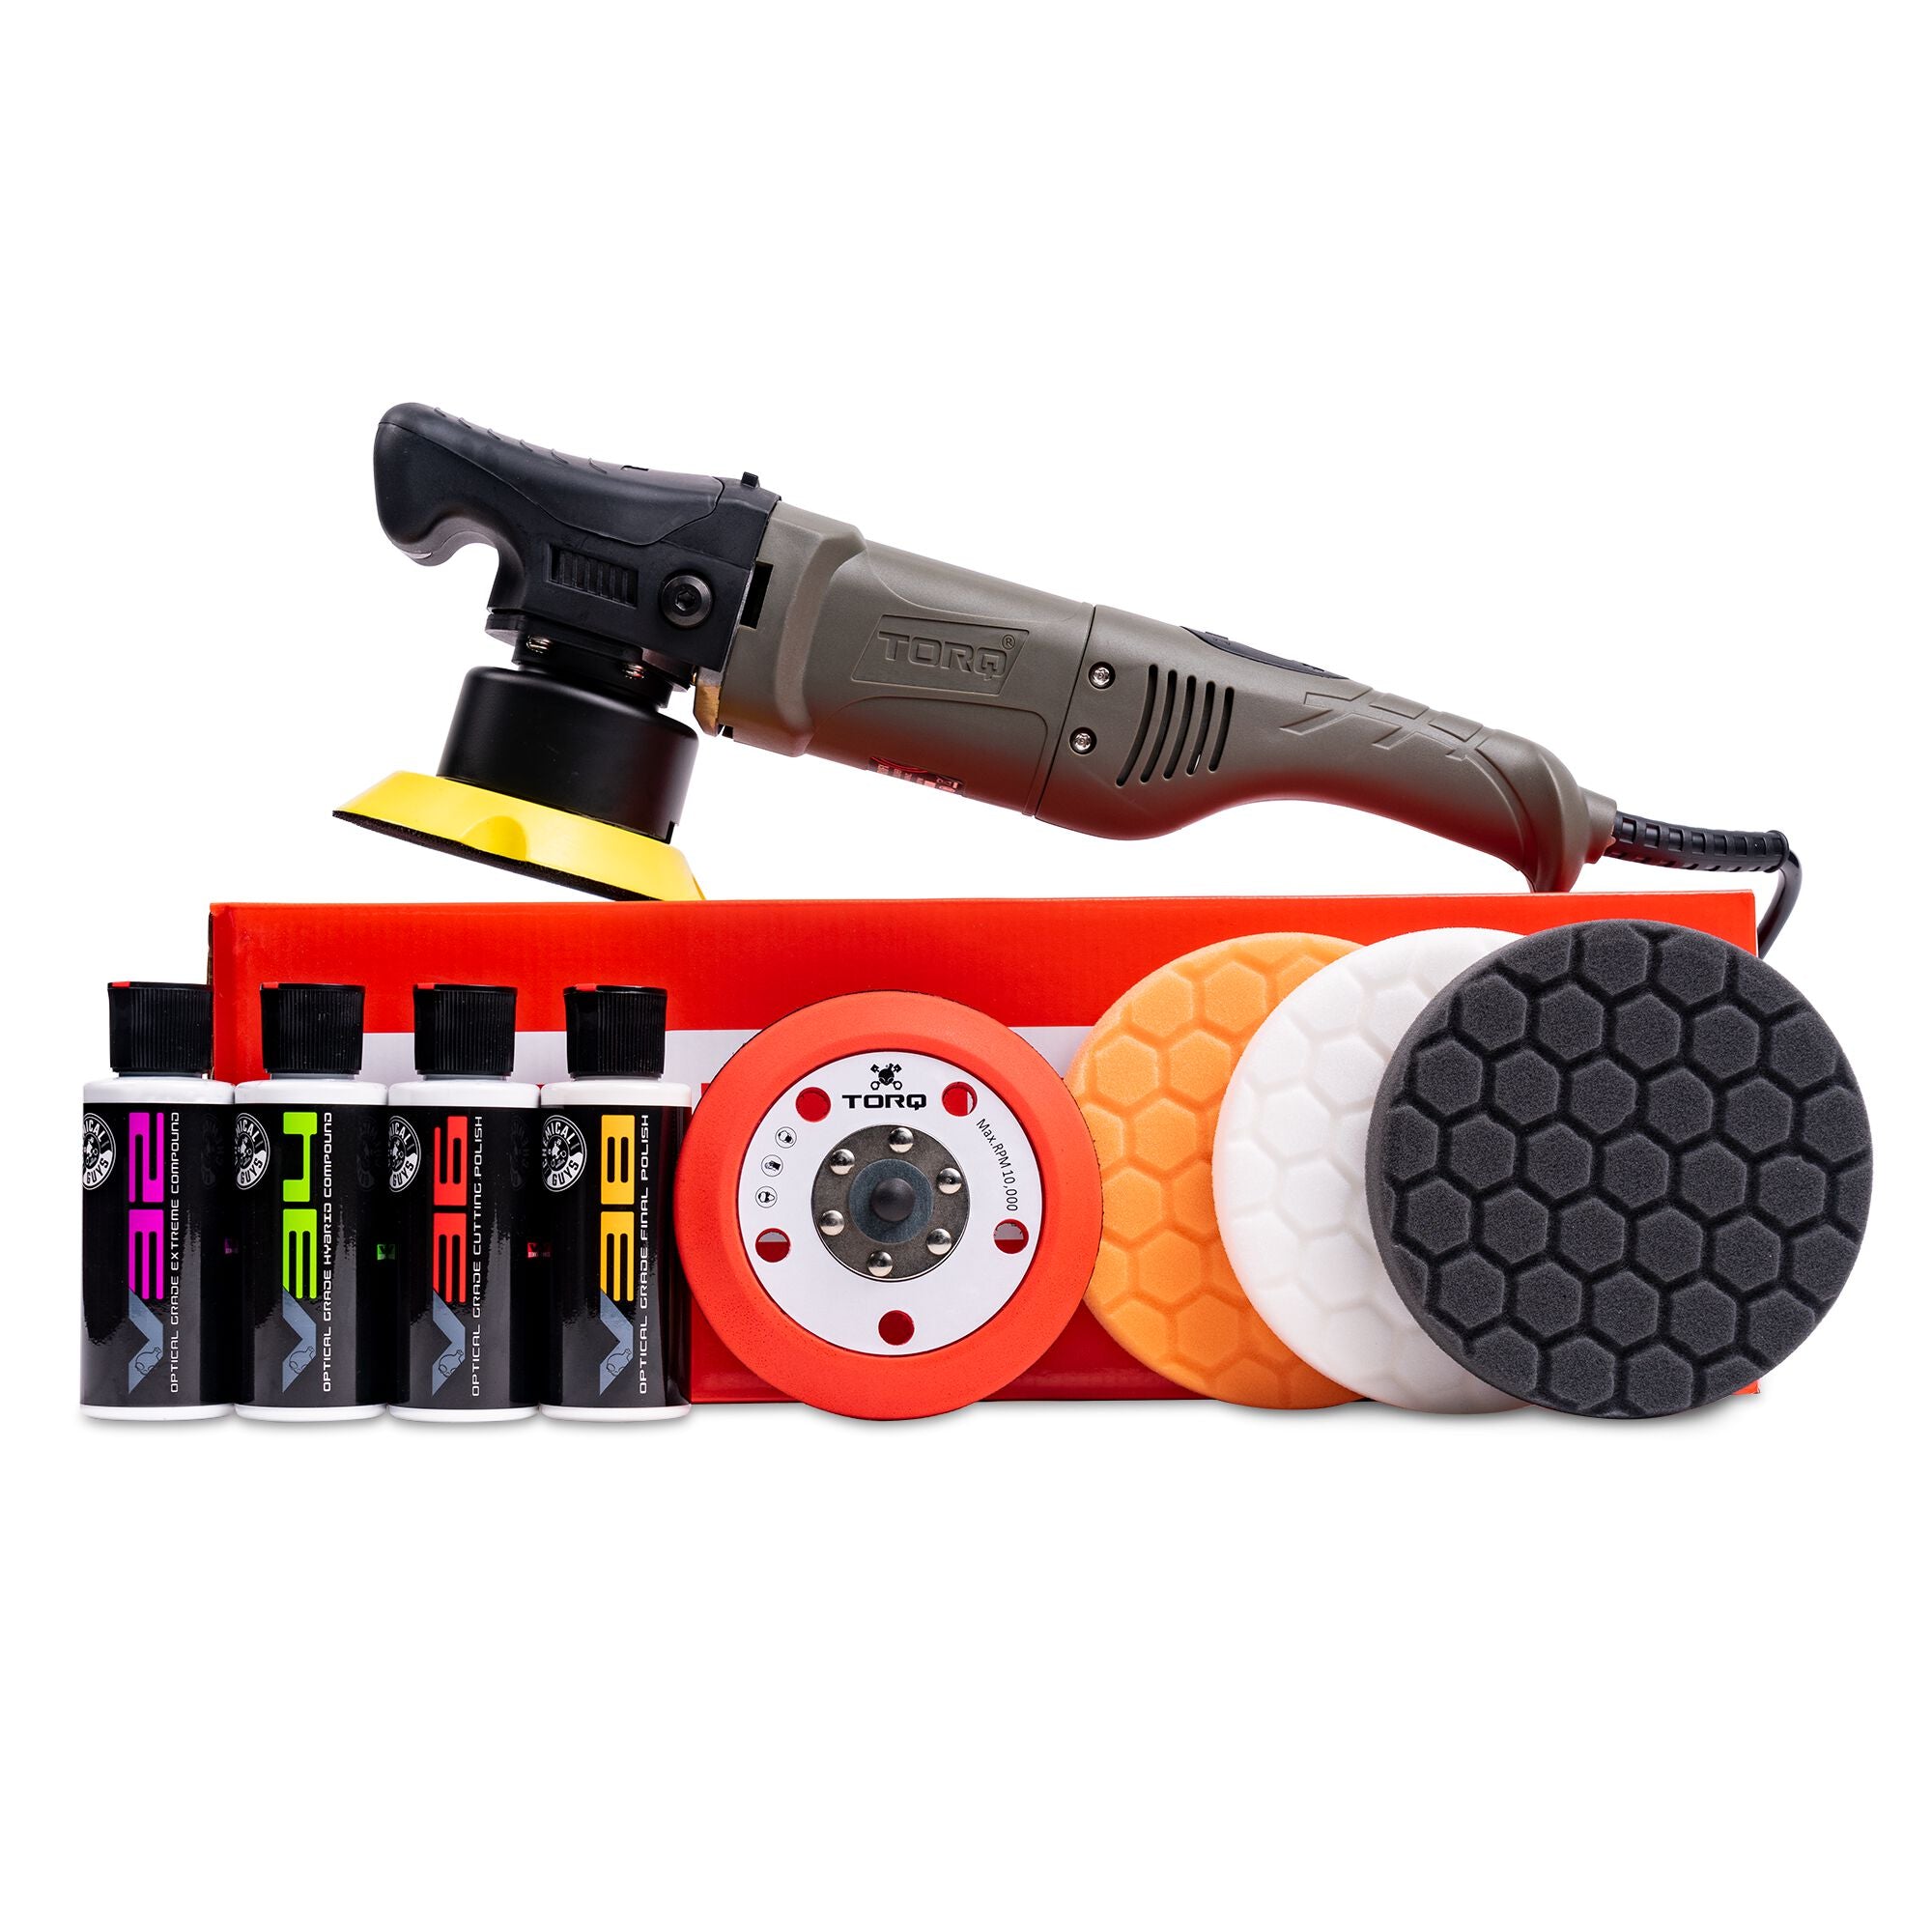 Frequent Use 4 Step TORQ 10FX Orbital Car Polisher Ultimate Kit